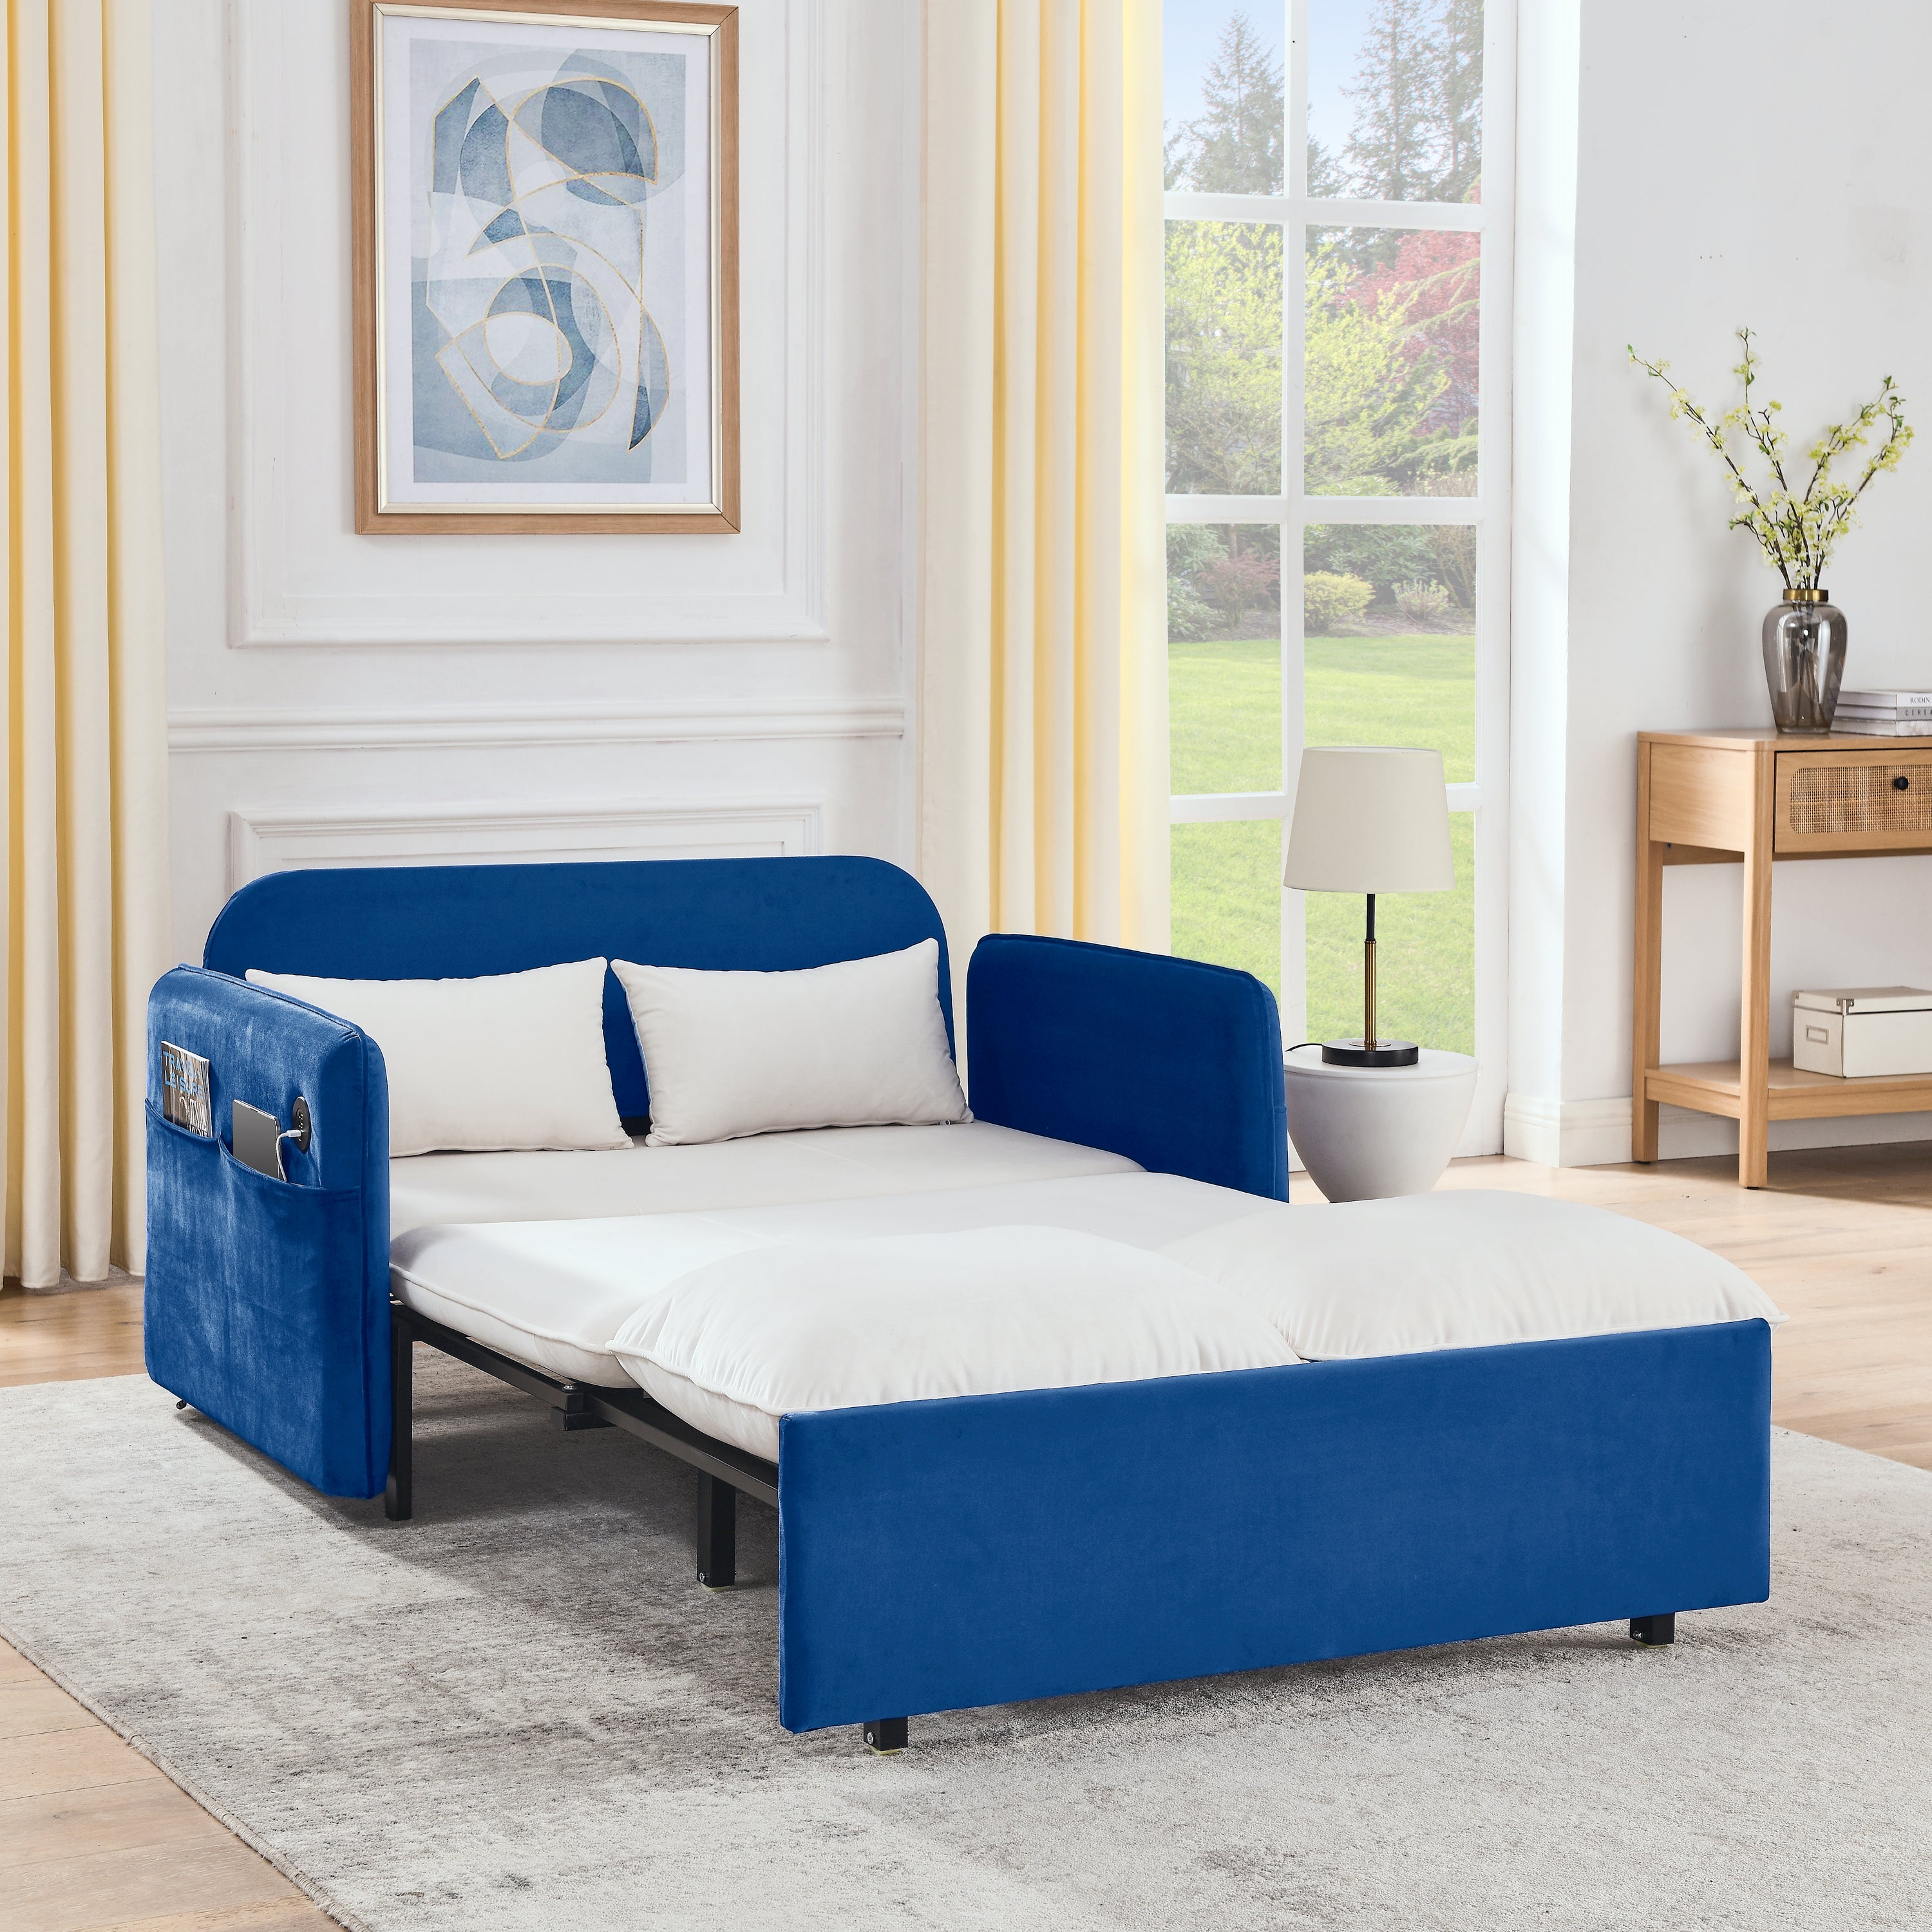 🆓🚛 53" Modern Convertible Sofa Bed W/2 Removable Armrests W/Usb Power Port, Velvet Recliner Adjustable Sofa W/Head Pull-Out Bed, 2 Pillows, for Living Room, White-Blue